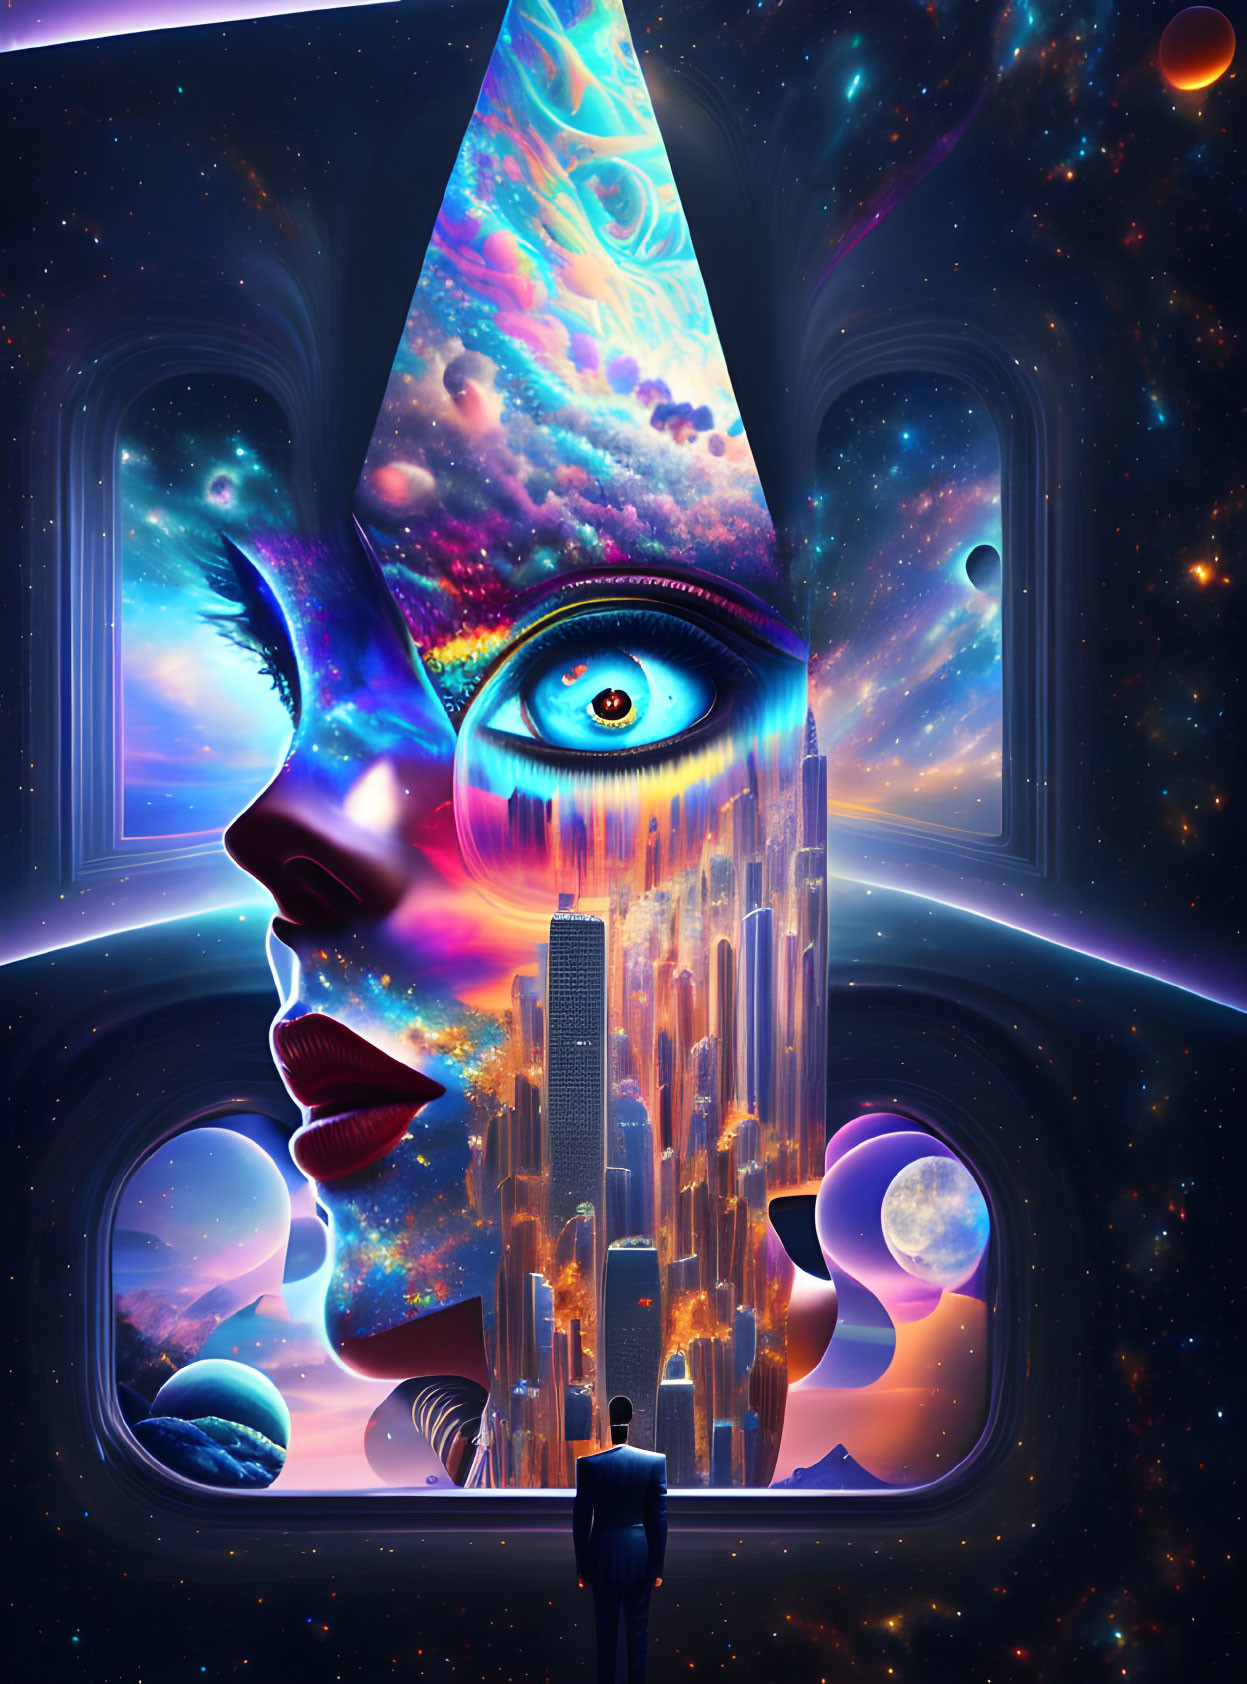 Cosmic surreal artwork: human silhouette, cityscape, giant celestial face, stars & planets